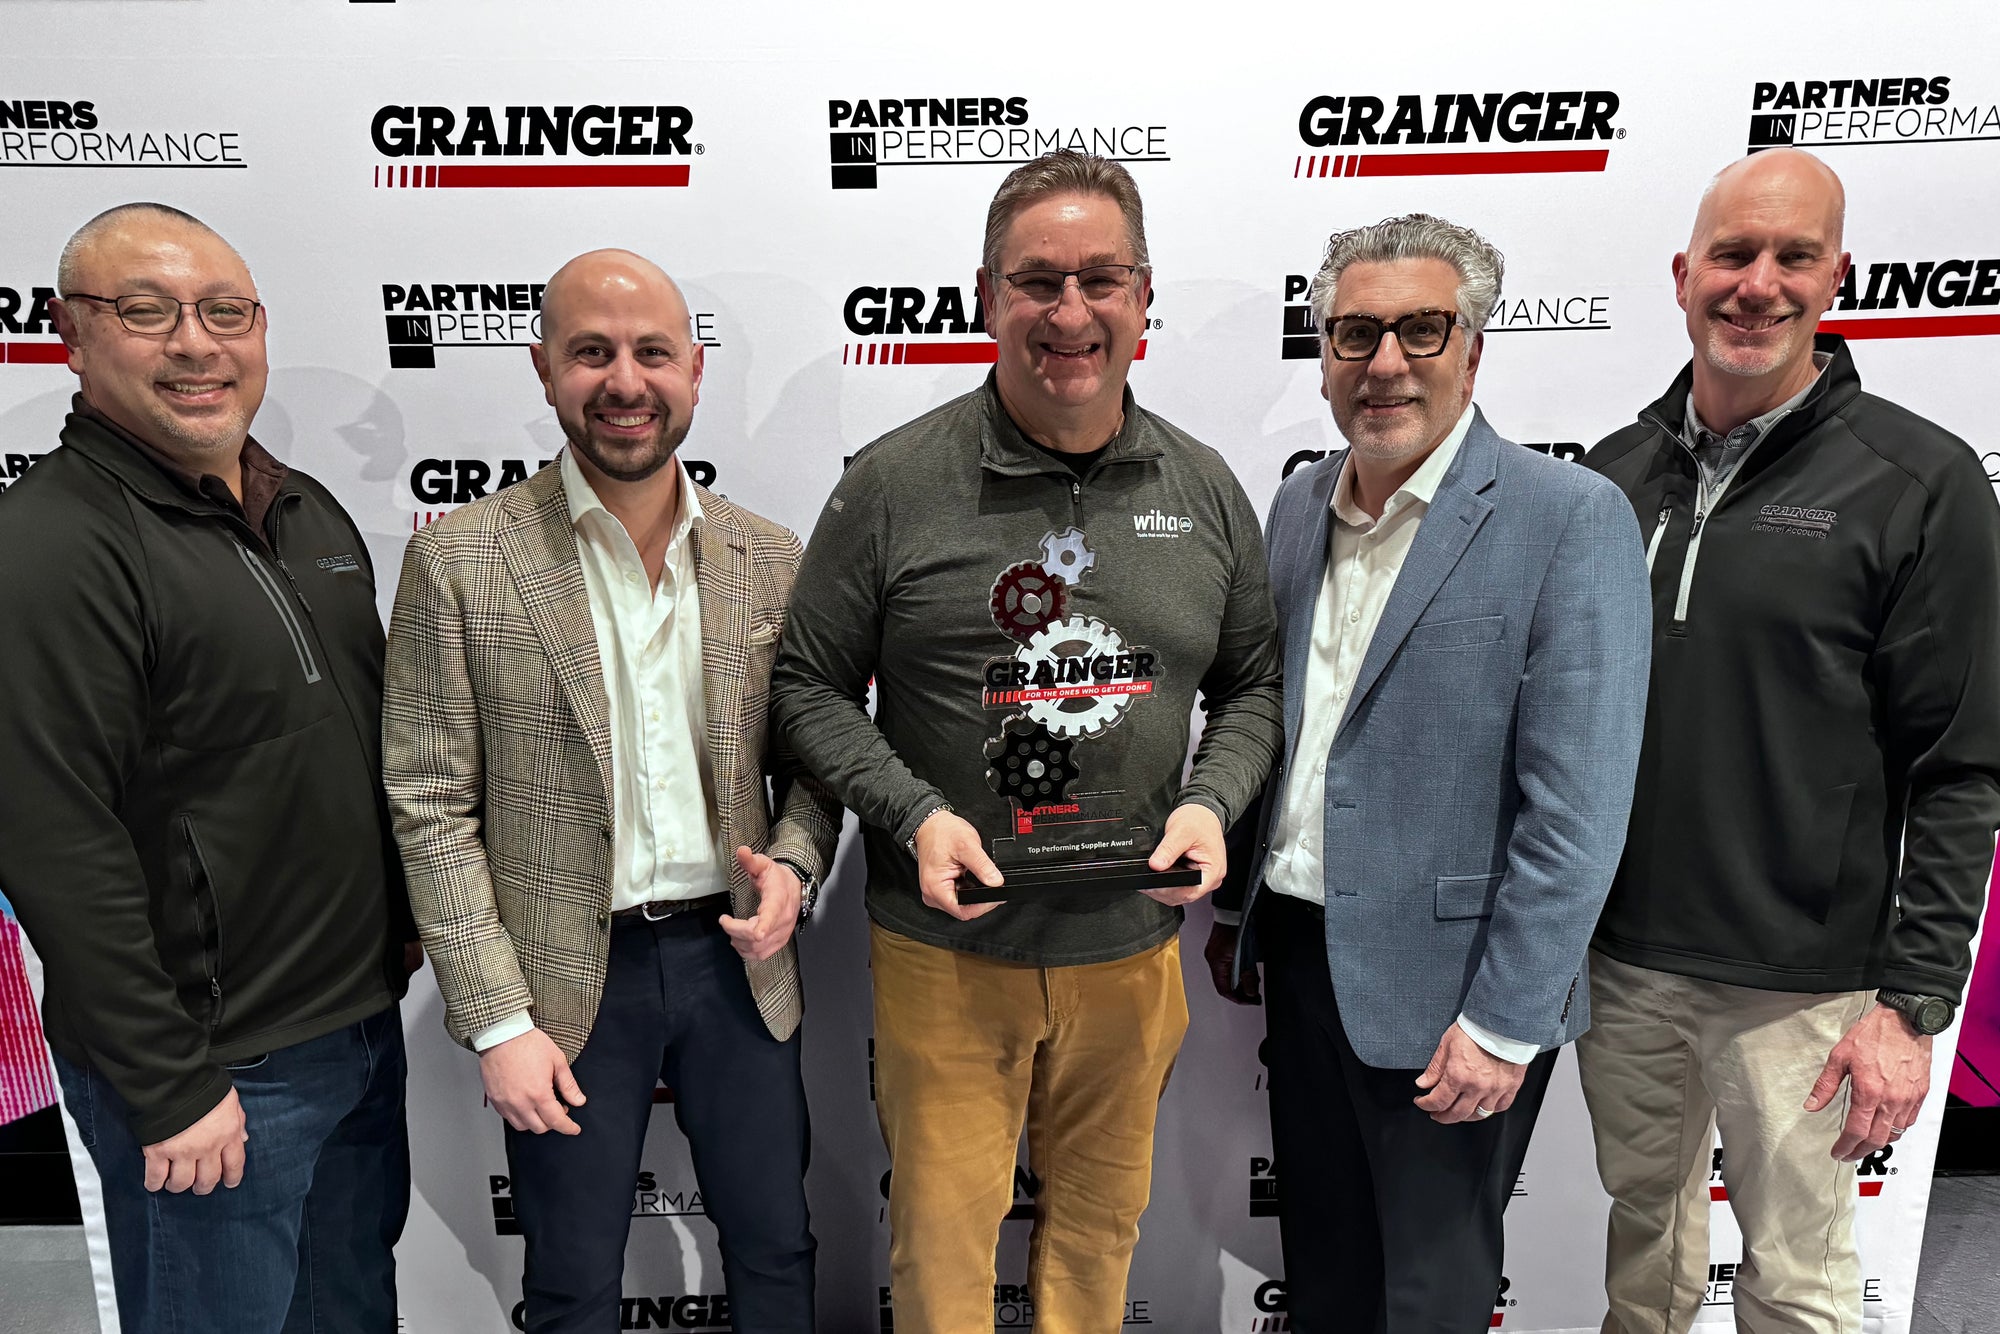 Wiha Tools Earns the Grainger Partners in Performance Award for the 2nd Consecutive Year